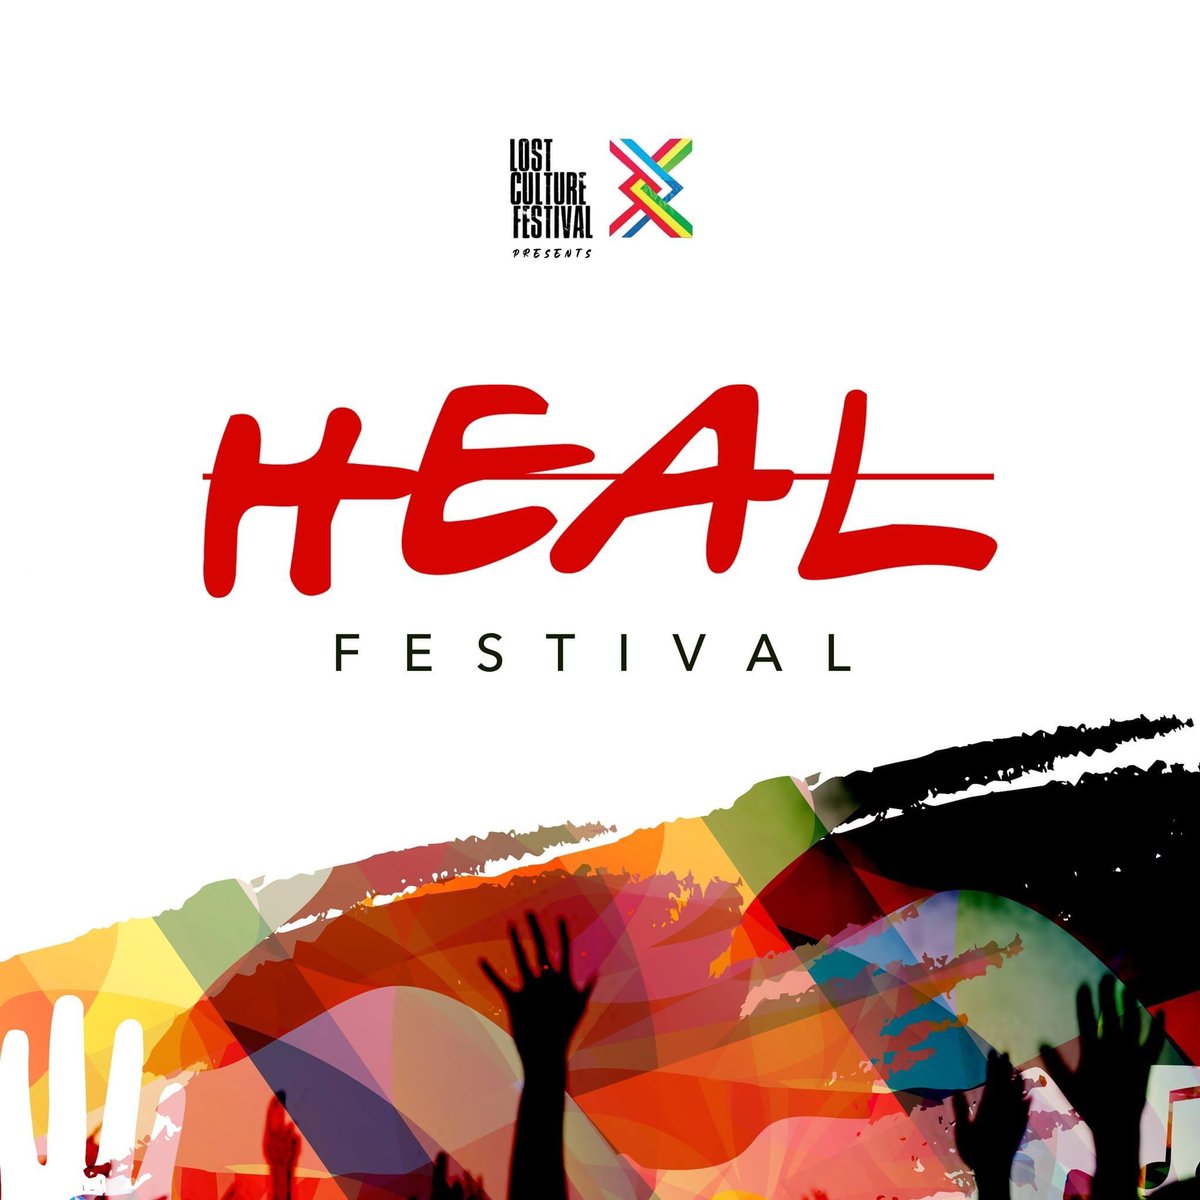 Thank you to @healfestivaluk for their support of our 7th event in aid of @lingendavies 
A donation of 4 weekend passes, with a face value of £200, to their 2023 festival in Shrewsbury. #healfestival #shrewsbury #shropshire #lingendavies #chordscrushcancer7